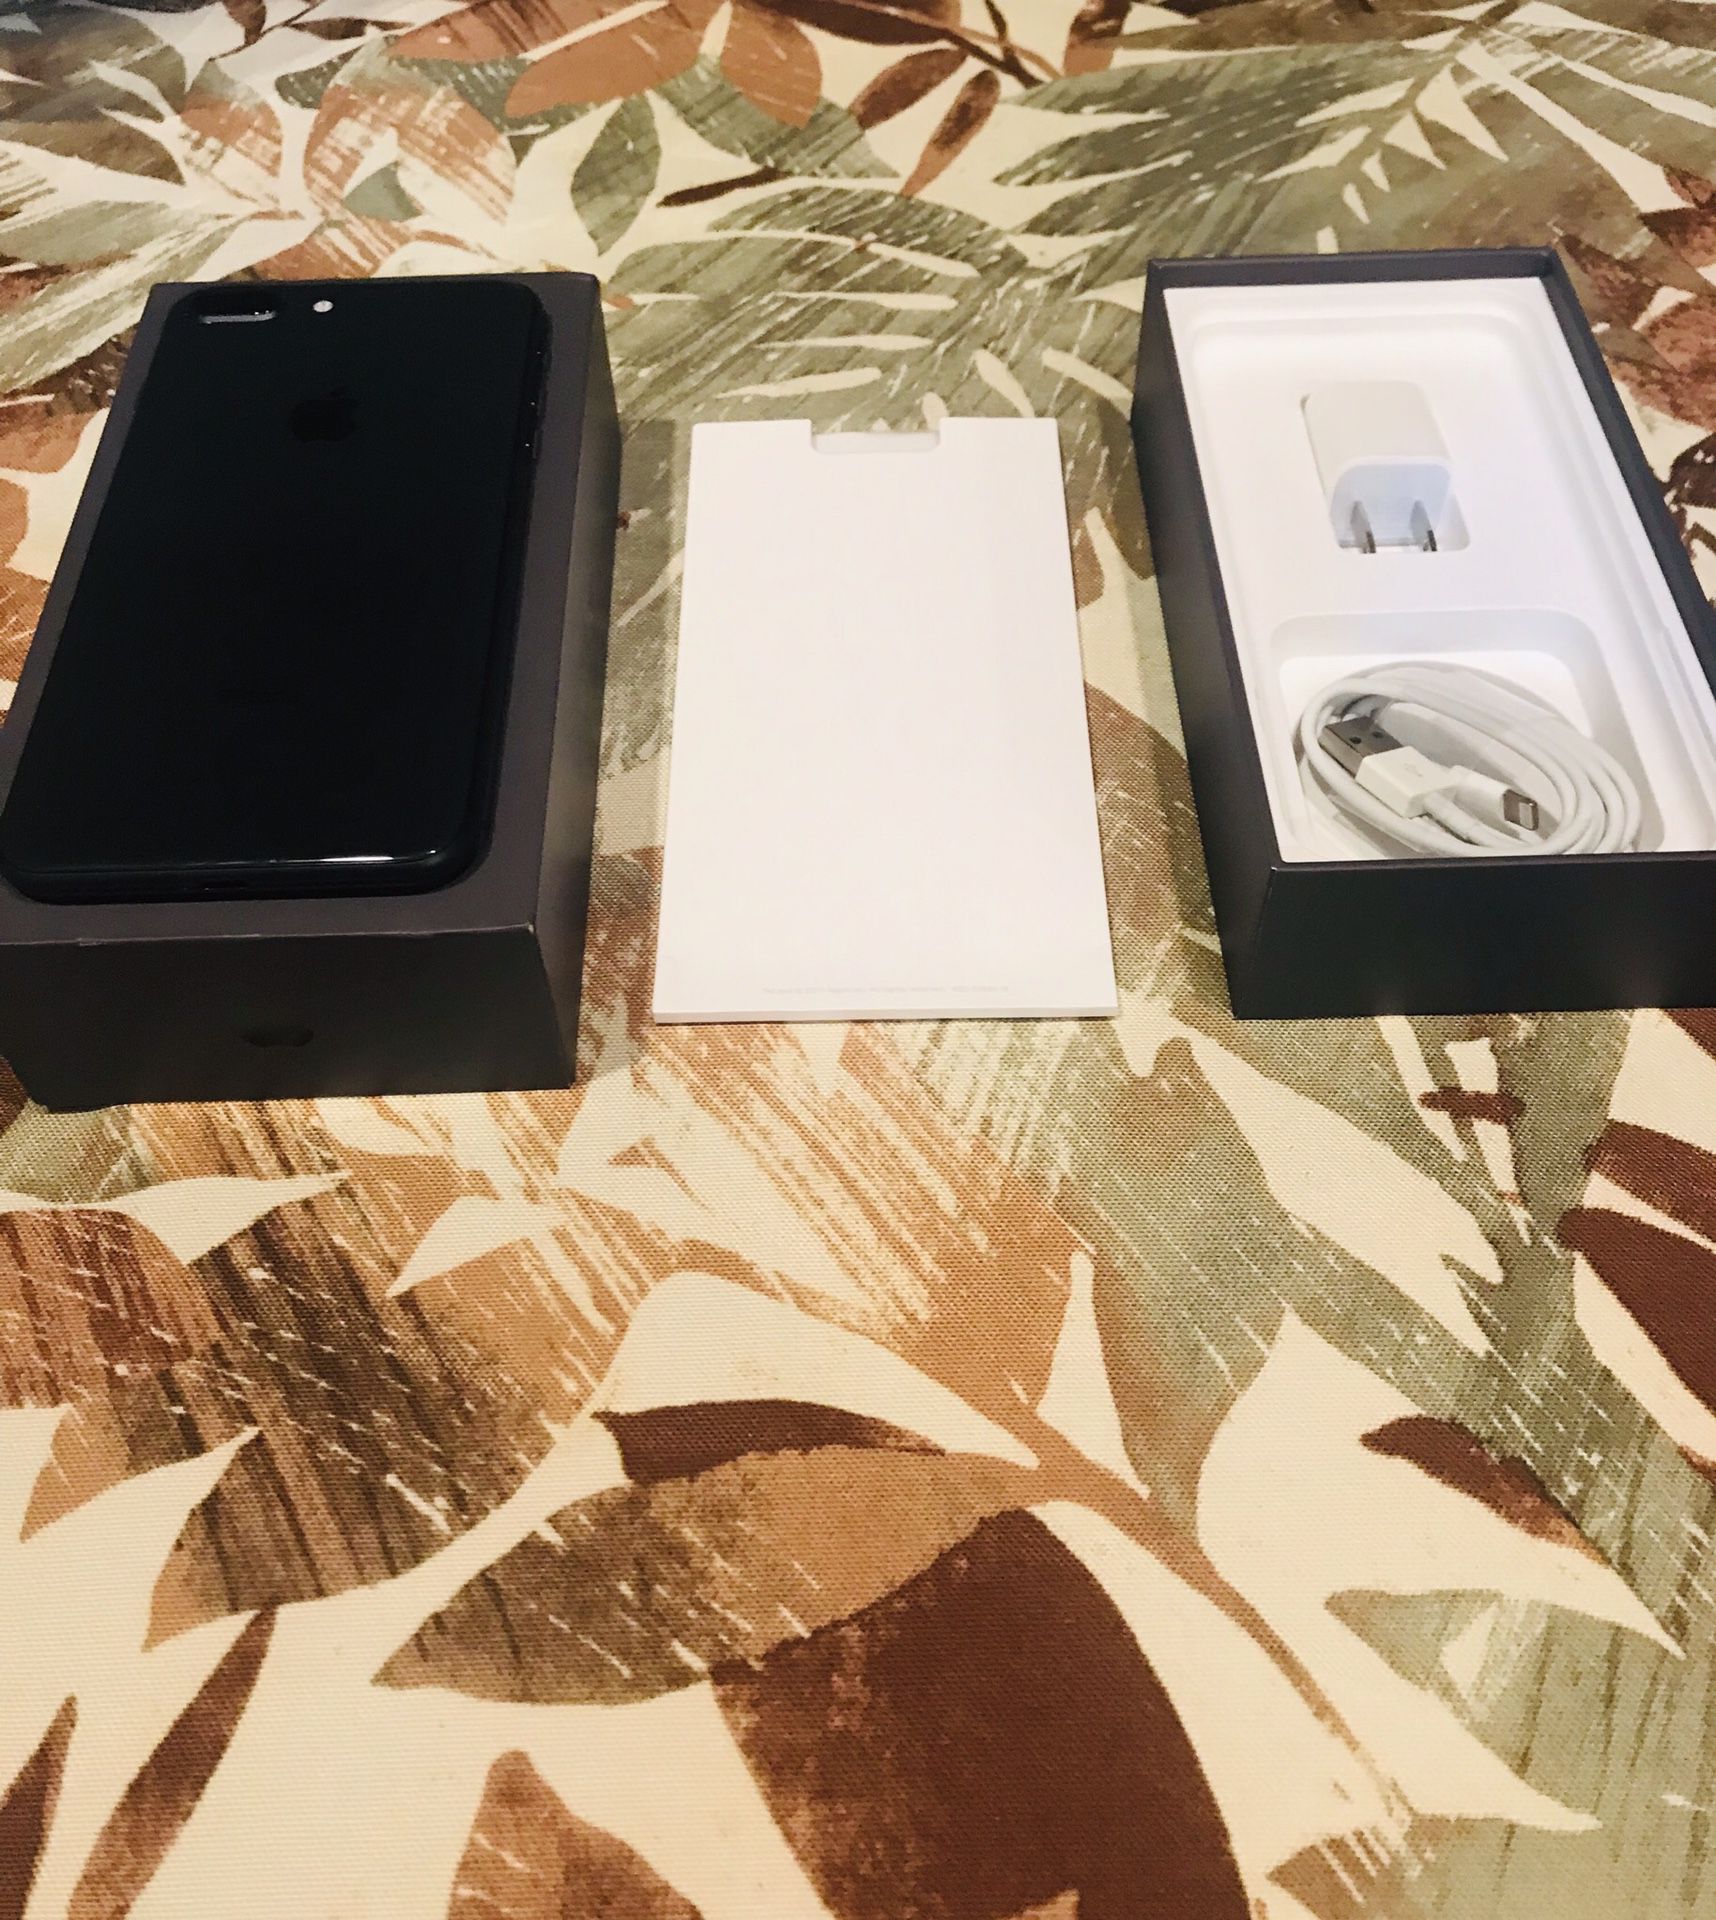 📲🇱🇷📲IPHONE 8 PLUS + 64GB T-MOBILE AND OR METRO PCS SIMPLE MOBILE SIRVE TAMBIEN EN 🇲🇽 MEXICO TELCEL TRUSTED SELLER 💯📲💯